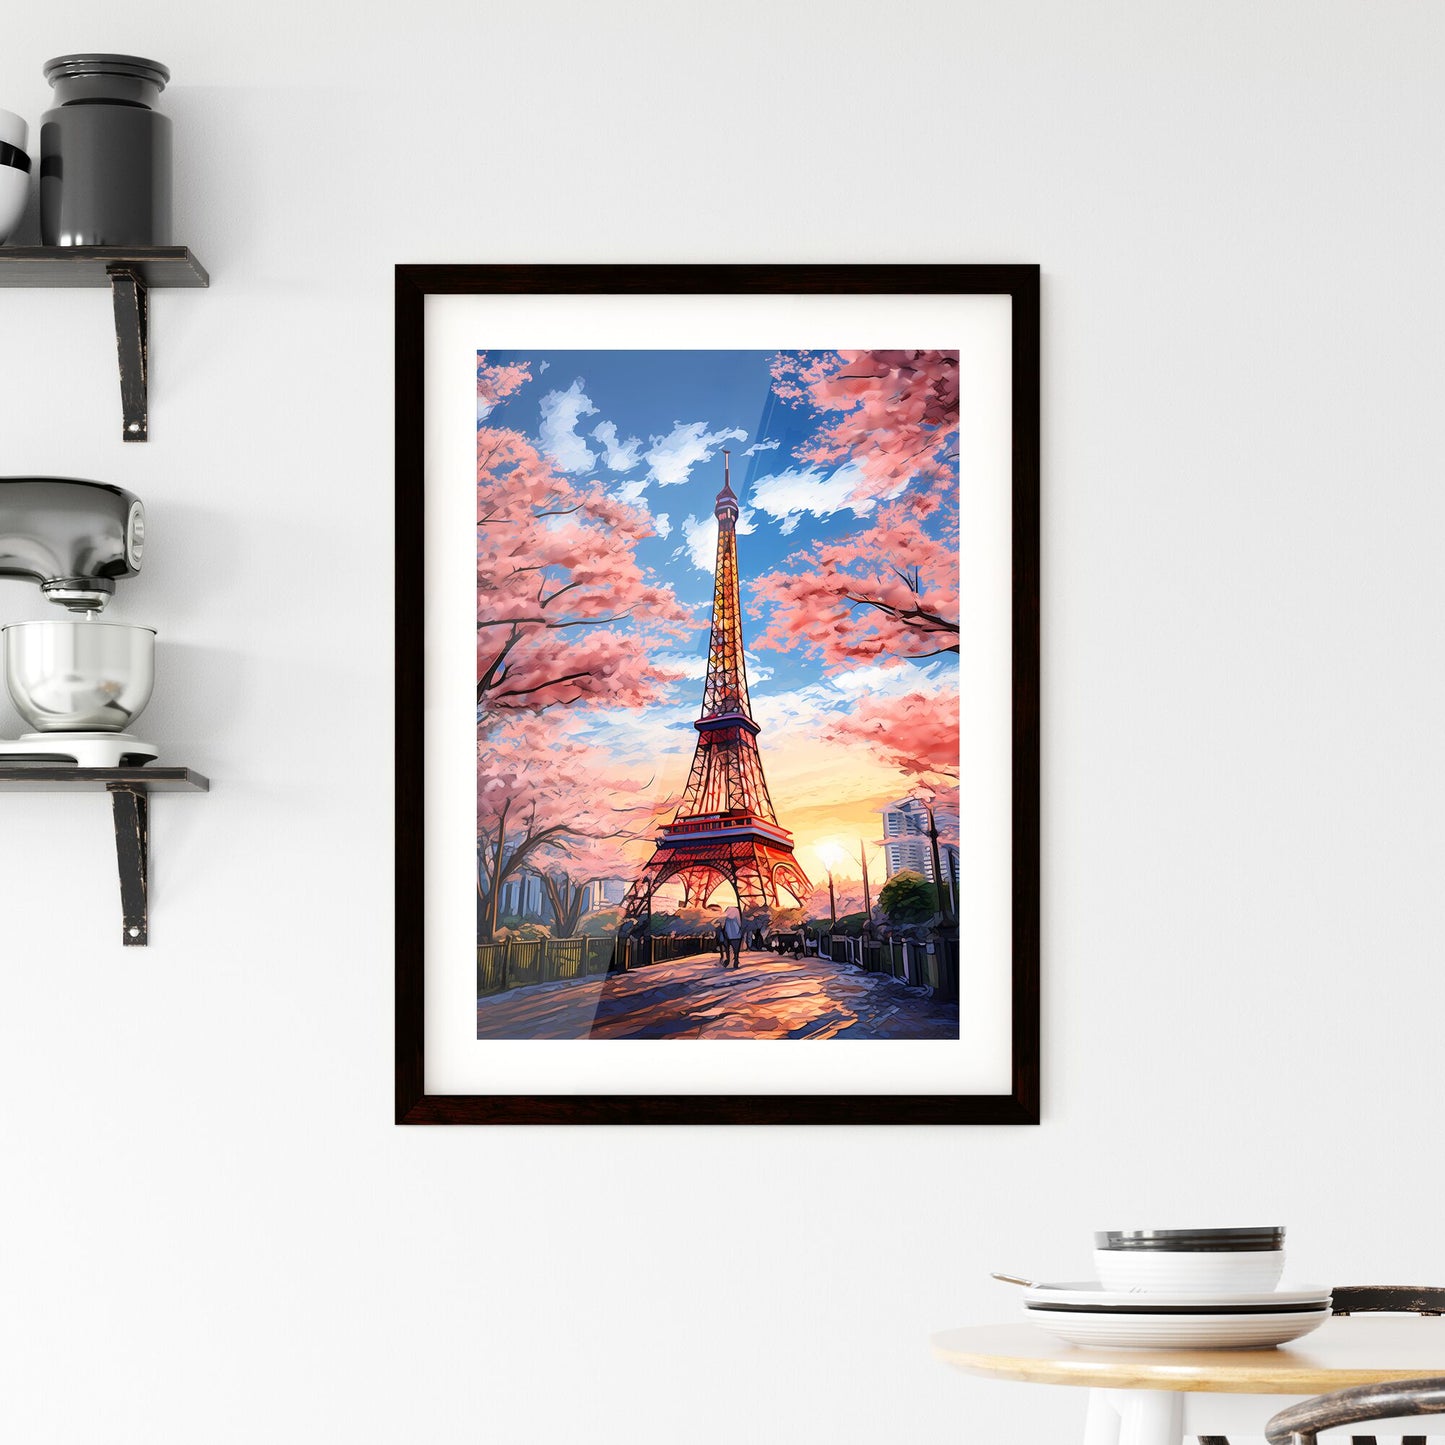 A Poster of A painting of the Tokyo Tower - A Tower With Pink Trees And People Walking In The Background Default Title